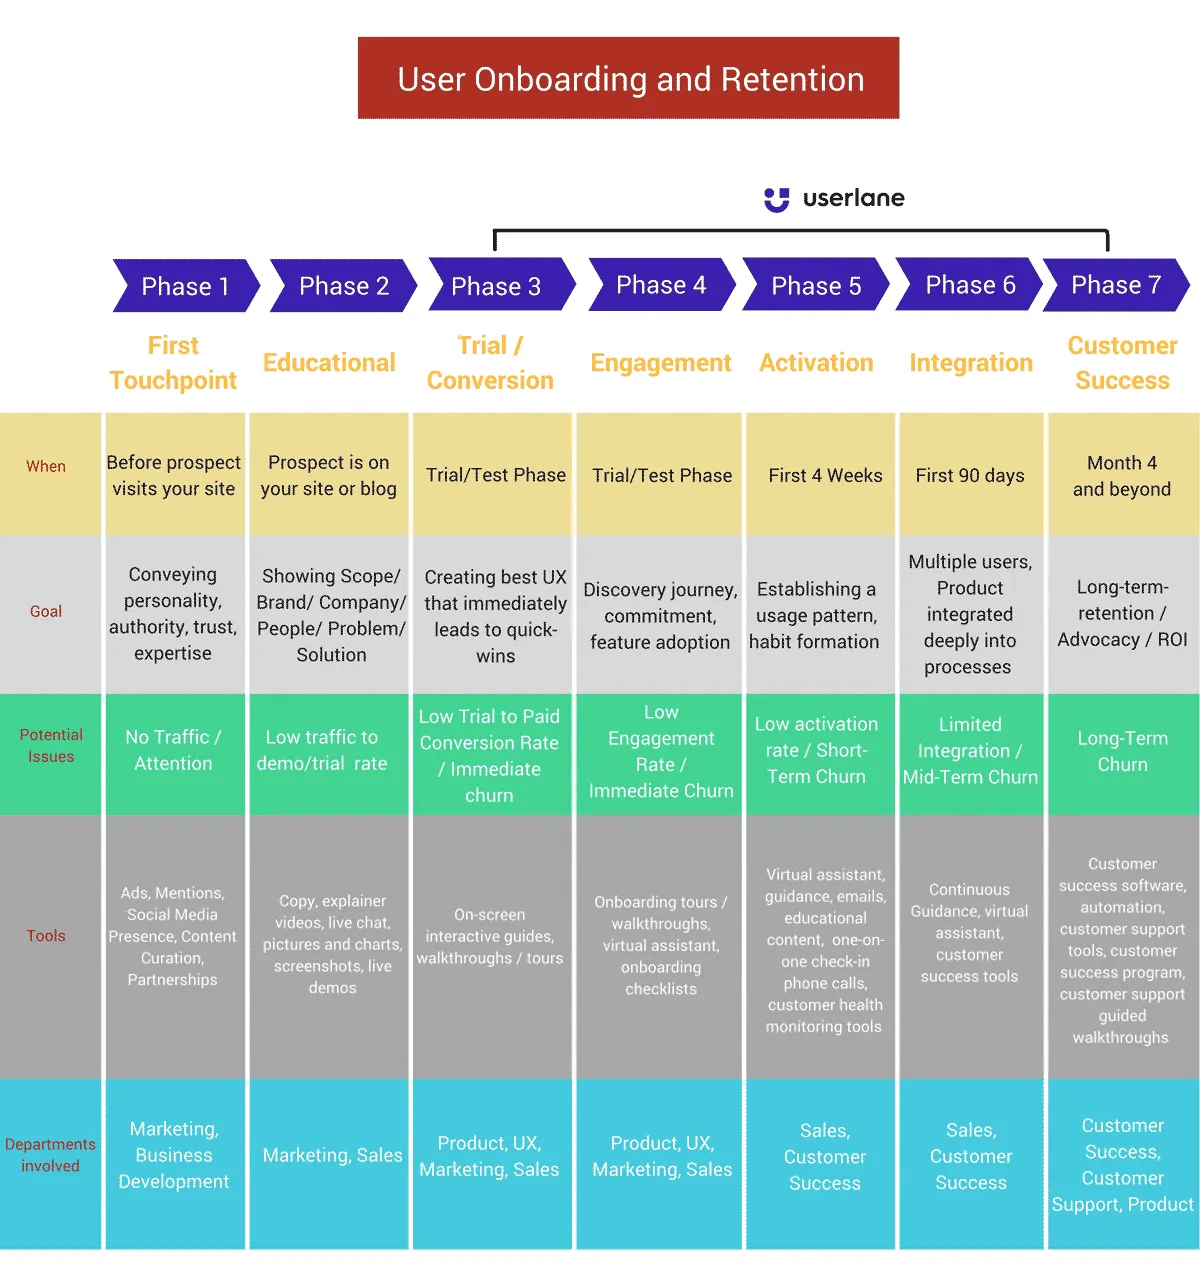 user onboarding and retention chart from Userlane